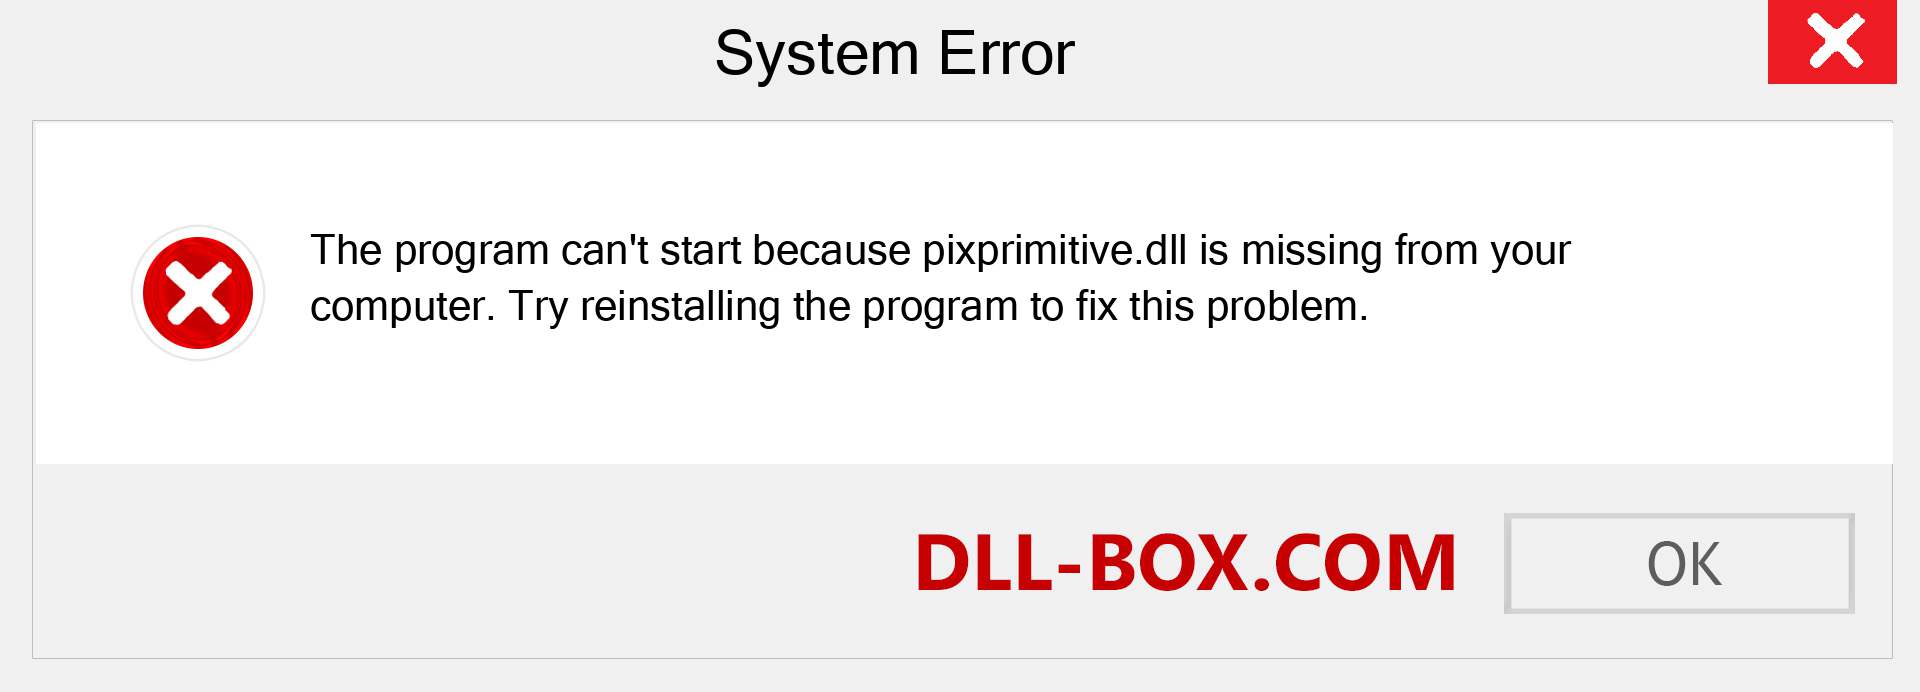  pixprimitive.dll file is missing?. Download for Windows 7, 8, 10 - Fix  pixprimitive dll Missing Error on Windows, photos, images